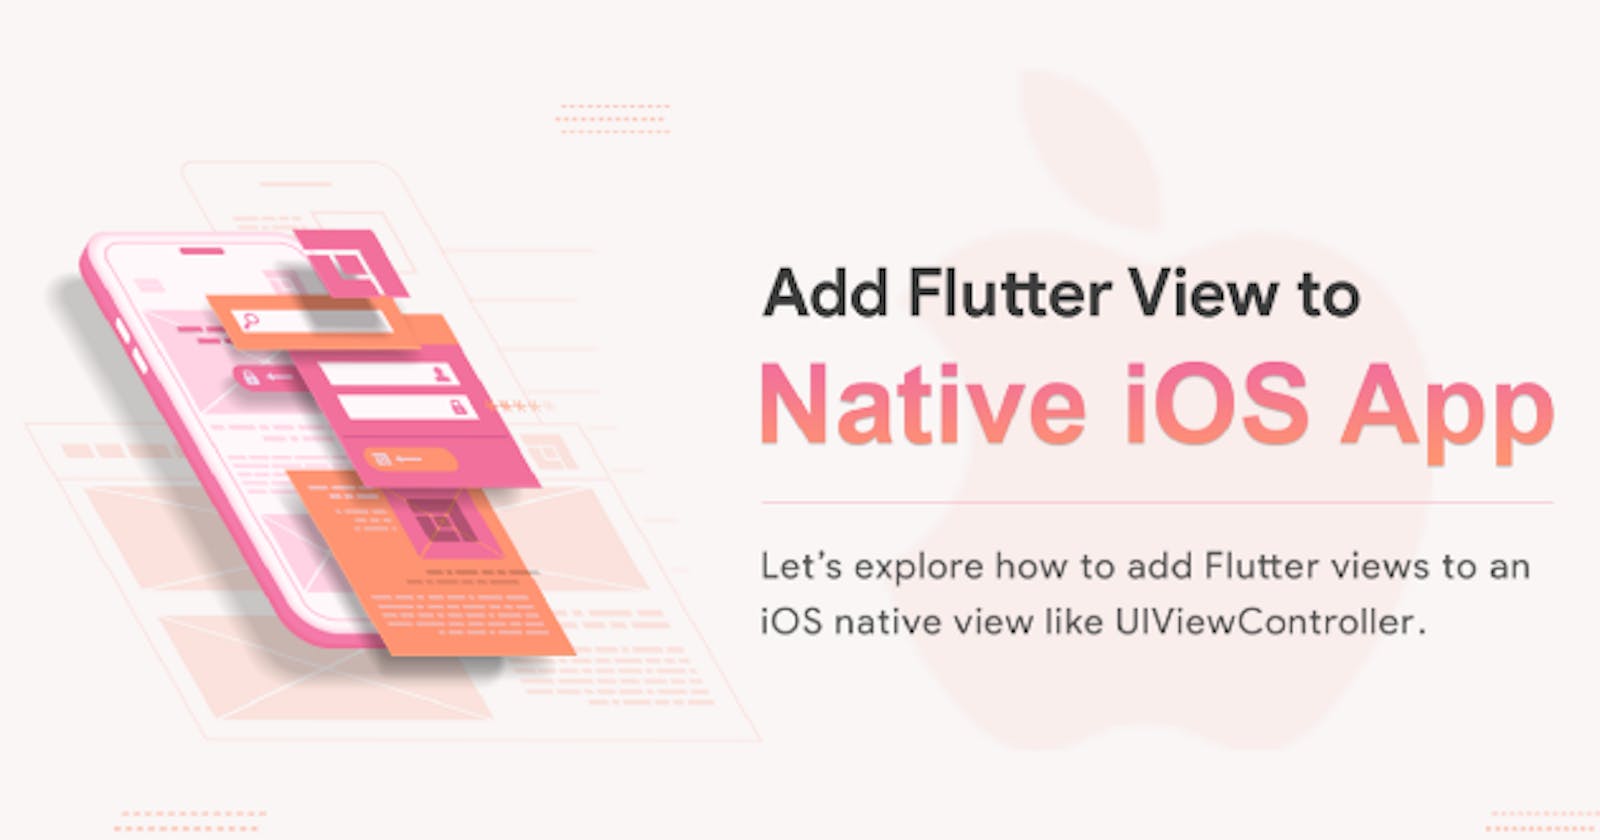 Add Flutter View to Native iOS App